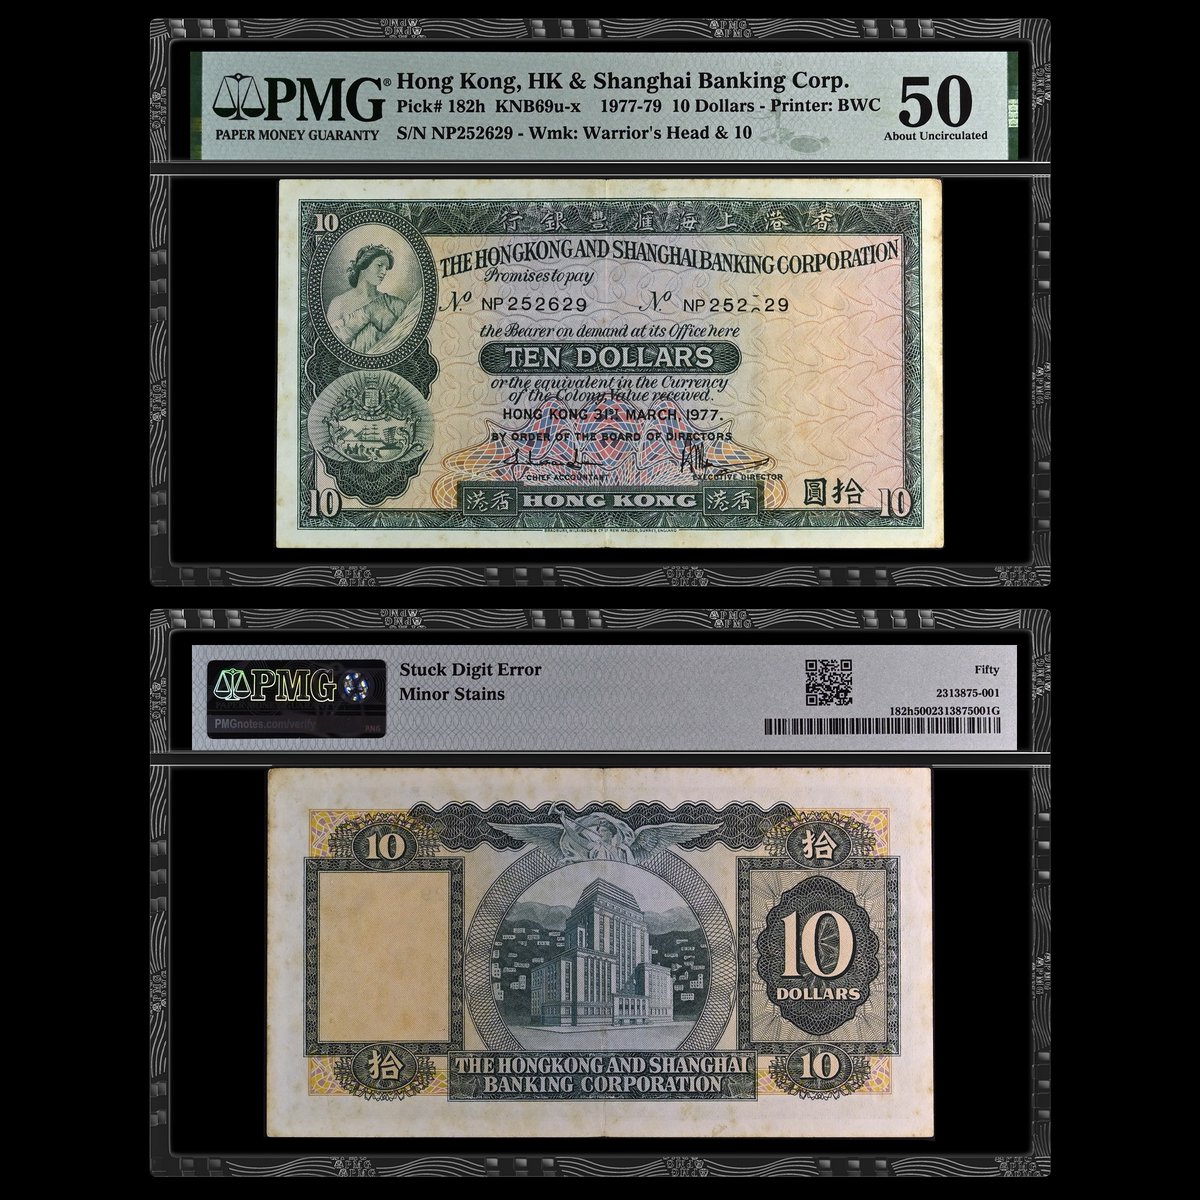 Check out the Stuck Digit Error on this #MistakeMonday highlight. Graded PMG 50 About Uncirculated, the error on this Hong Kong, HK & Shanghai Banking Corporation 1977-79 10 Dollars is a result of the numbering wheel used in the printing process failing to advance properly.